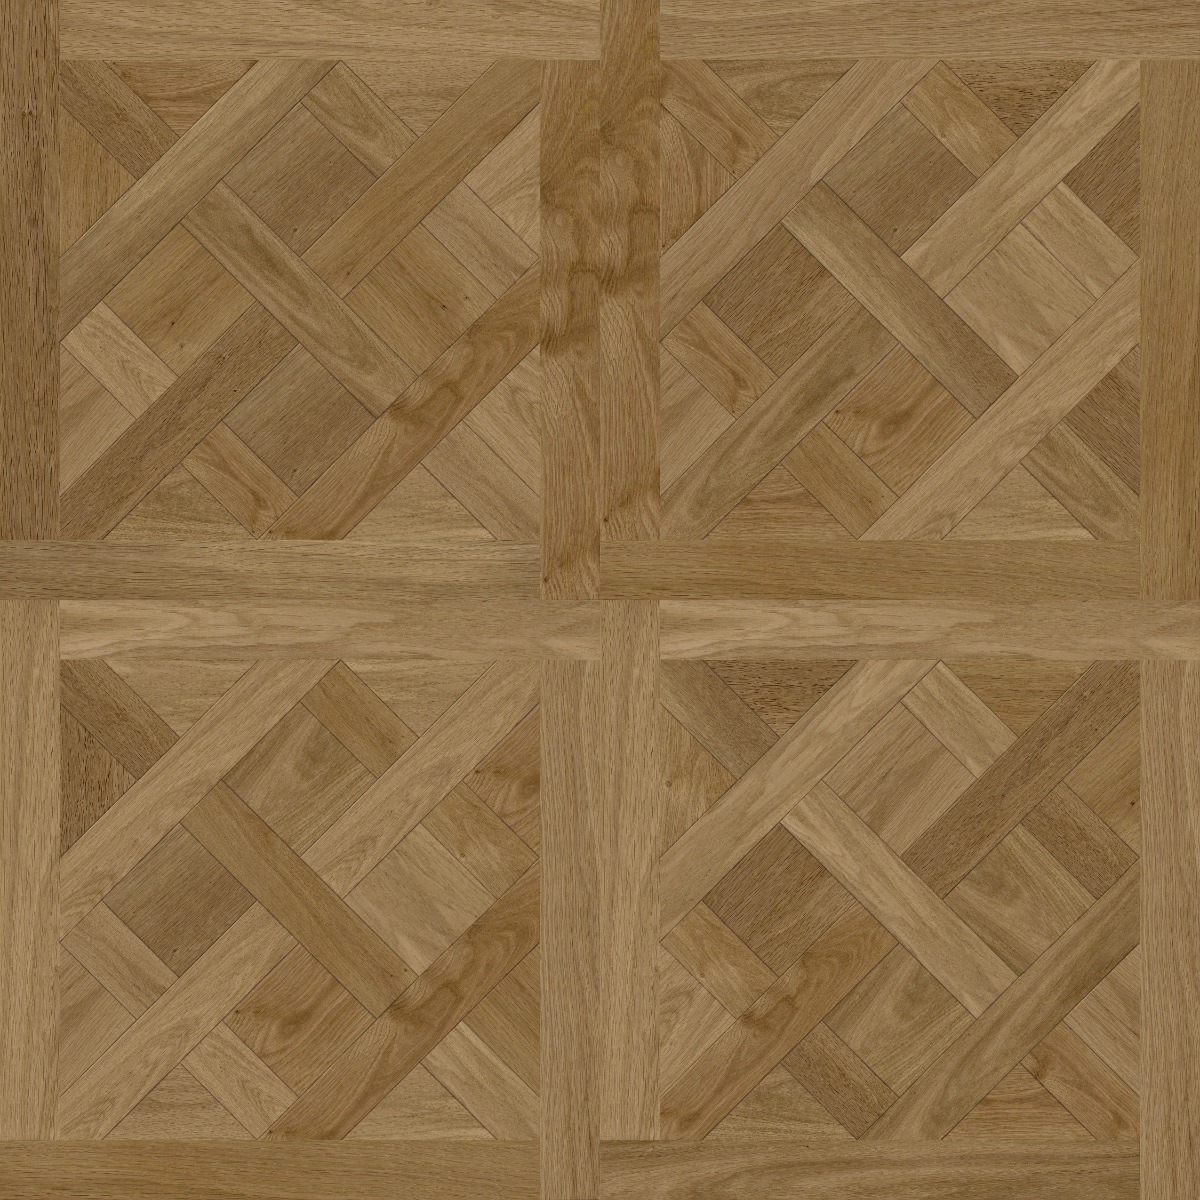 A seamless wood texture with expressive 152 boards arranged in a Framed Versailles pattern